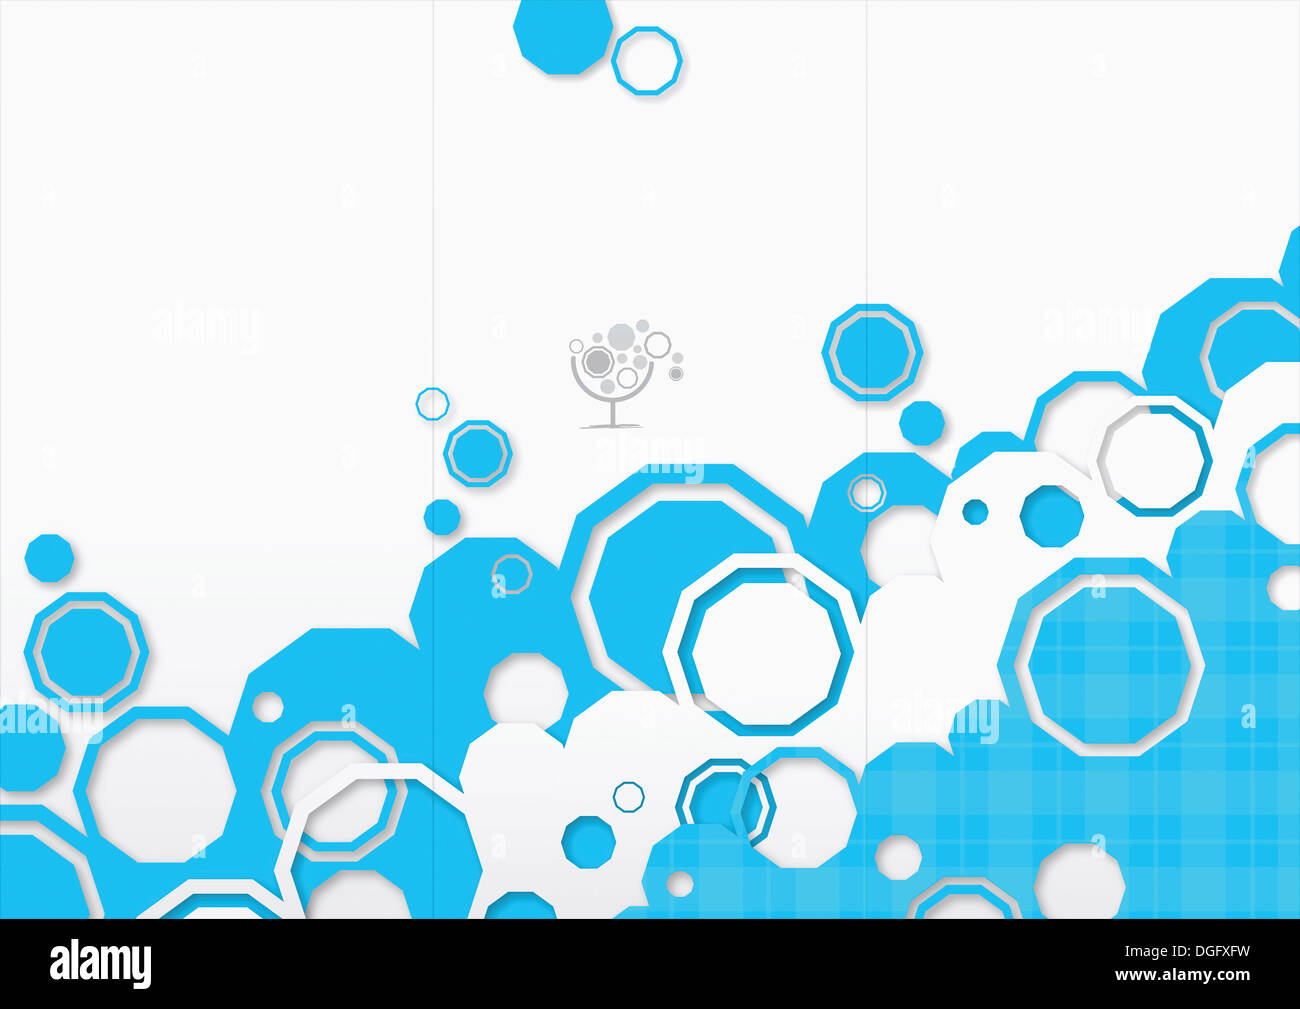 ppt background template design with blue shapes Stock Photo - Alamy